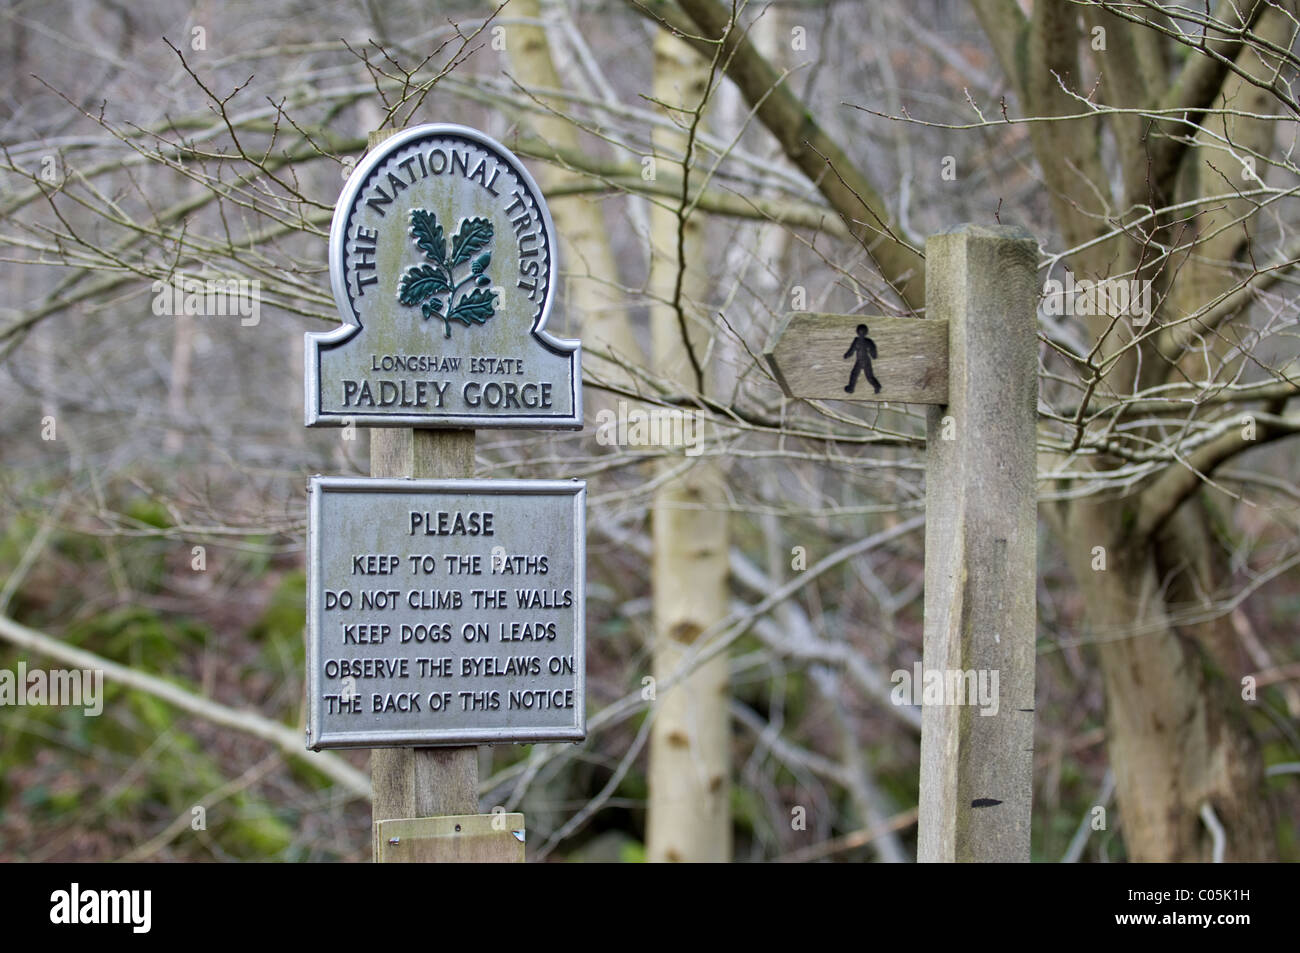 National Trust sign in Padley Gorge showing footpath direction in the Peak District Nation Park Derbyshire East Midlands Uk Stock Photo